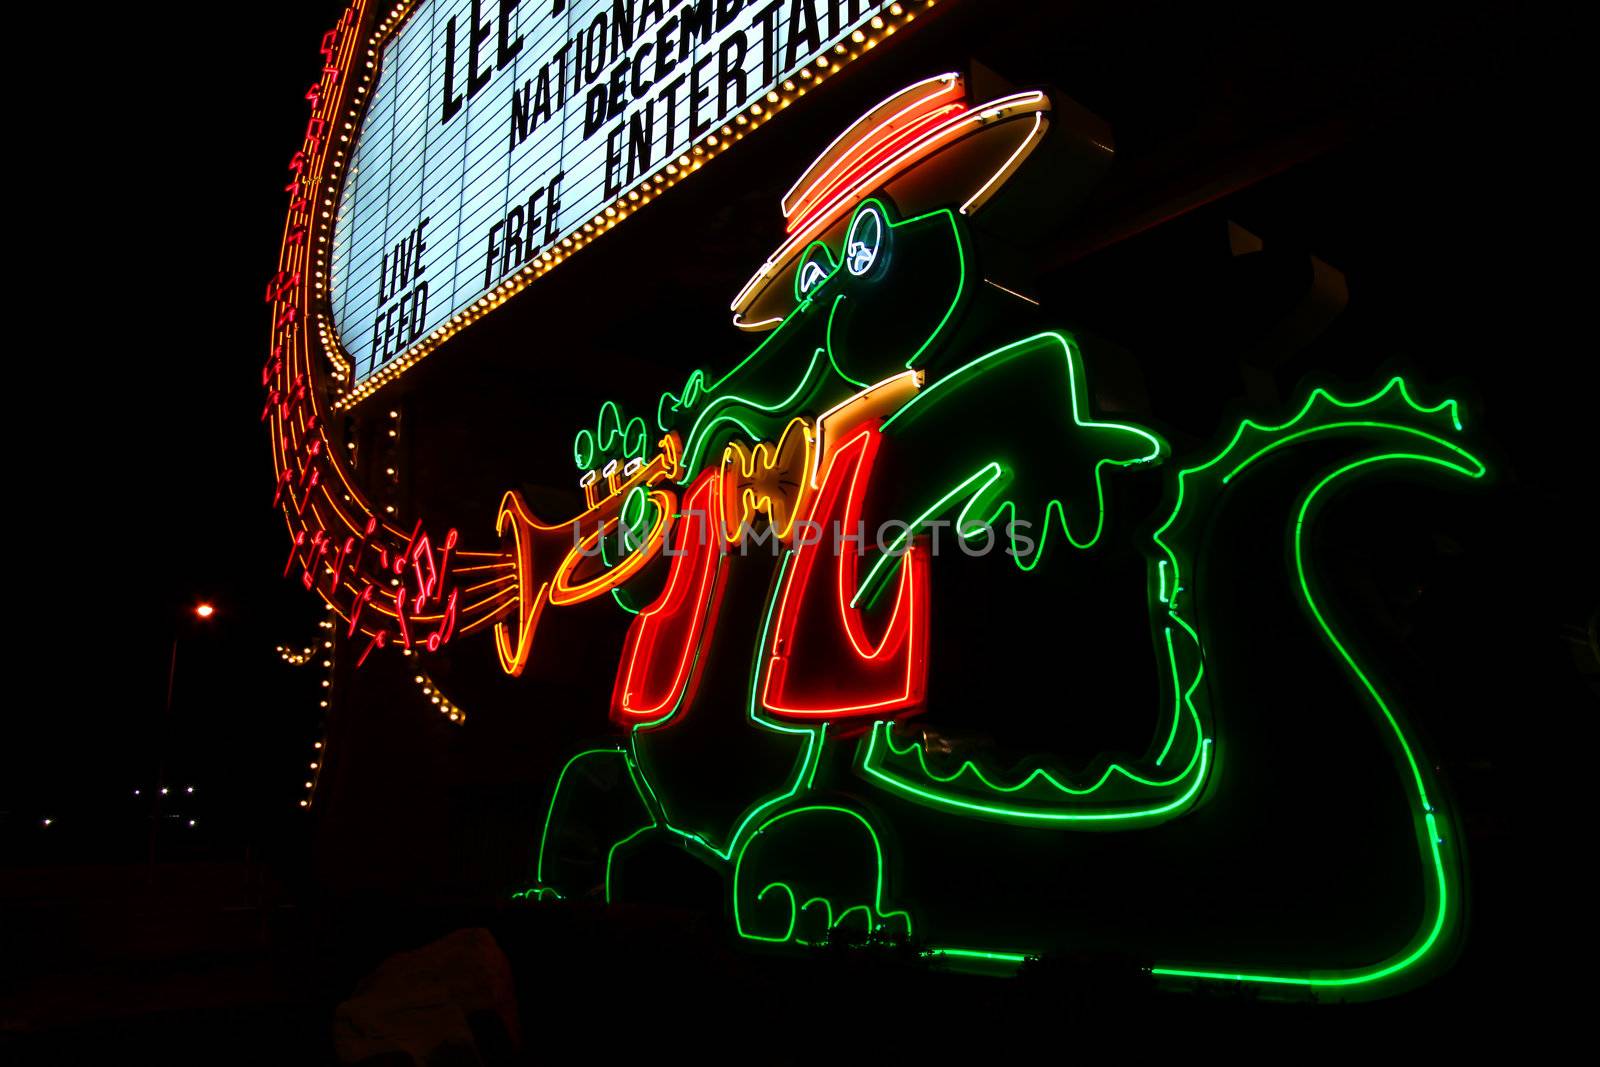 Las Vegas, USA - November 30, 2011: Musical Alligator Sign at the main entrance to The Orleans Hotel and Casino on Tropicana Avenue in Las Vegas.